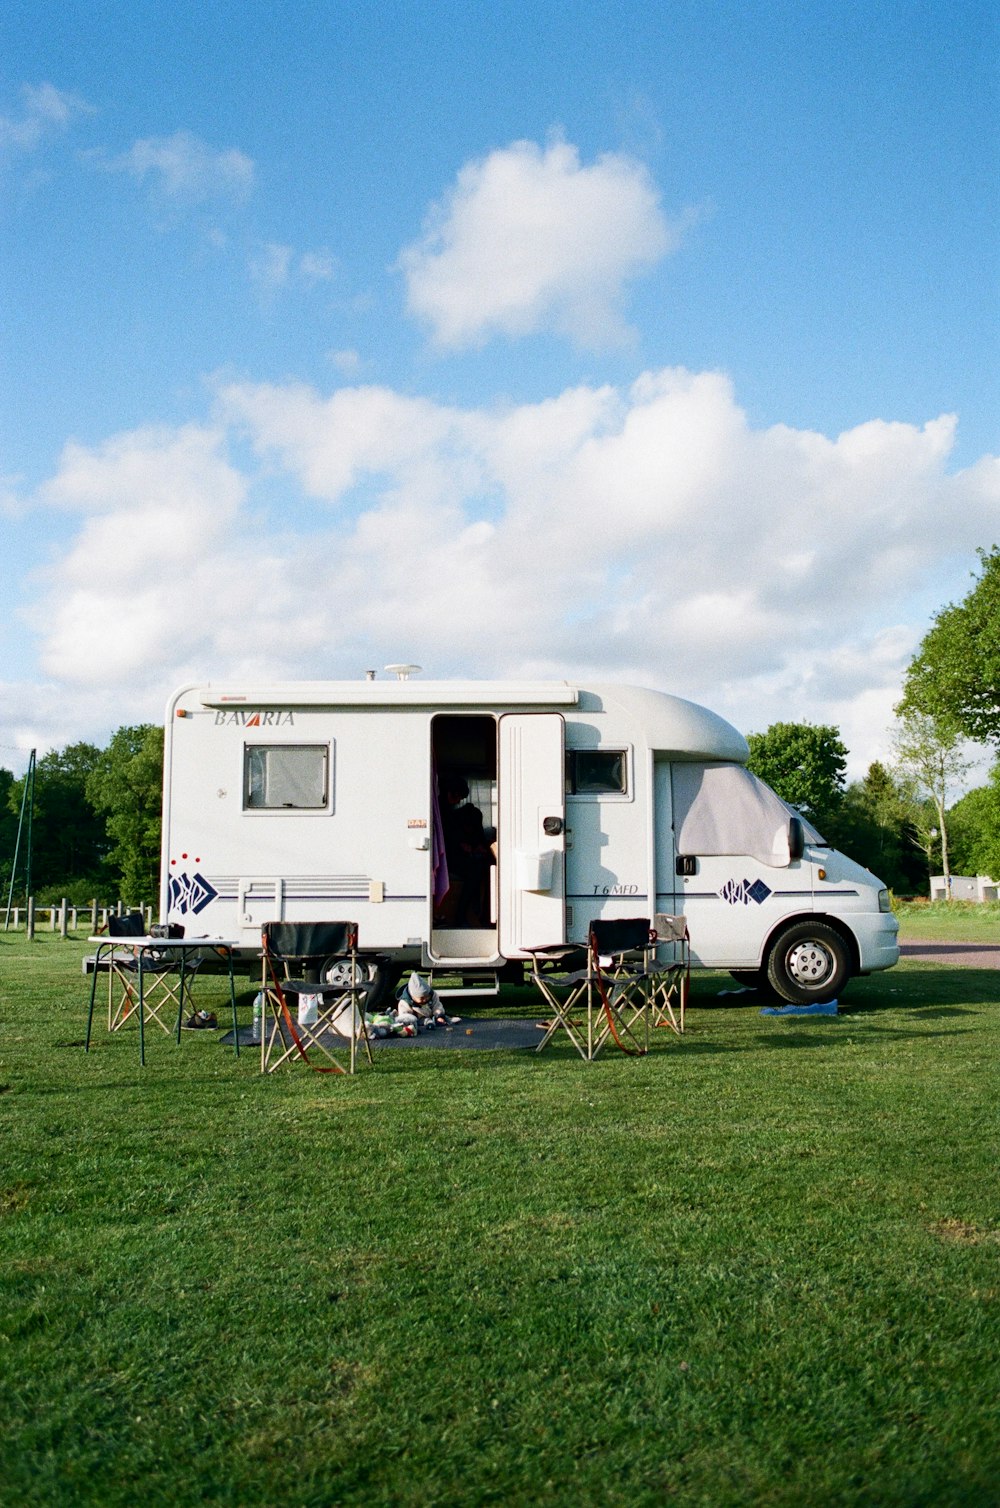 white and brown rv trailer on green grass field under white cloudy sky during daytime